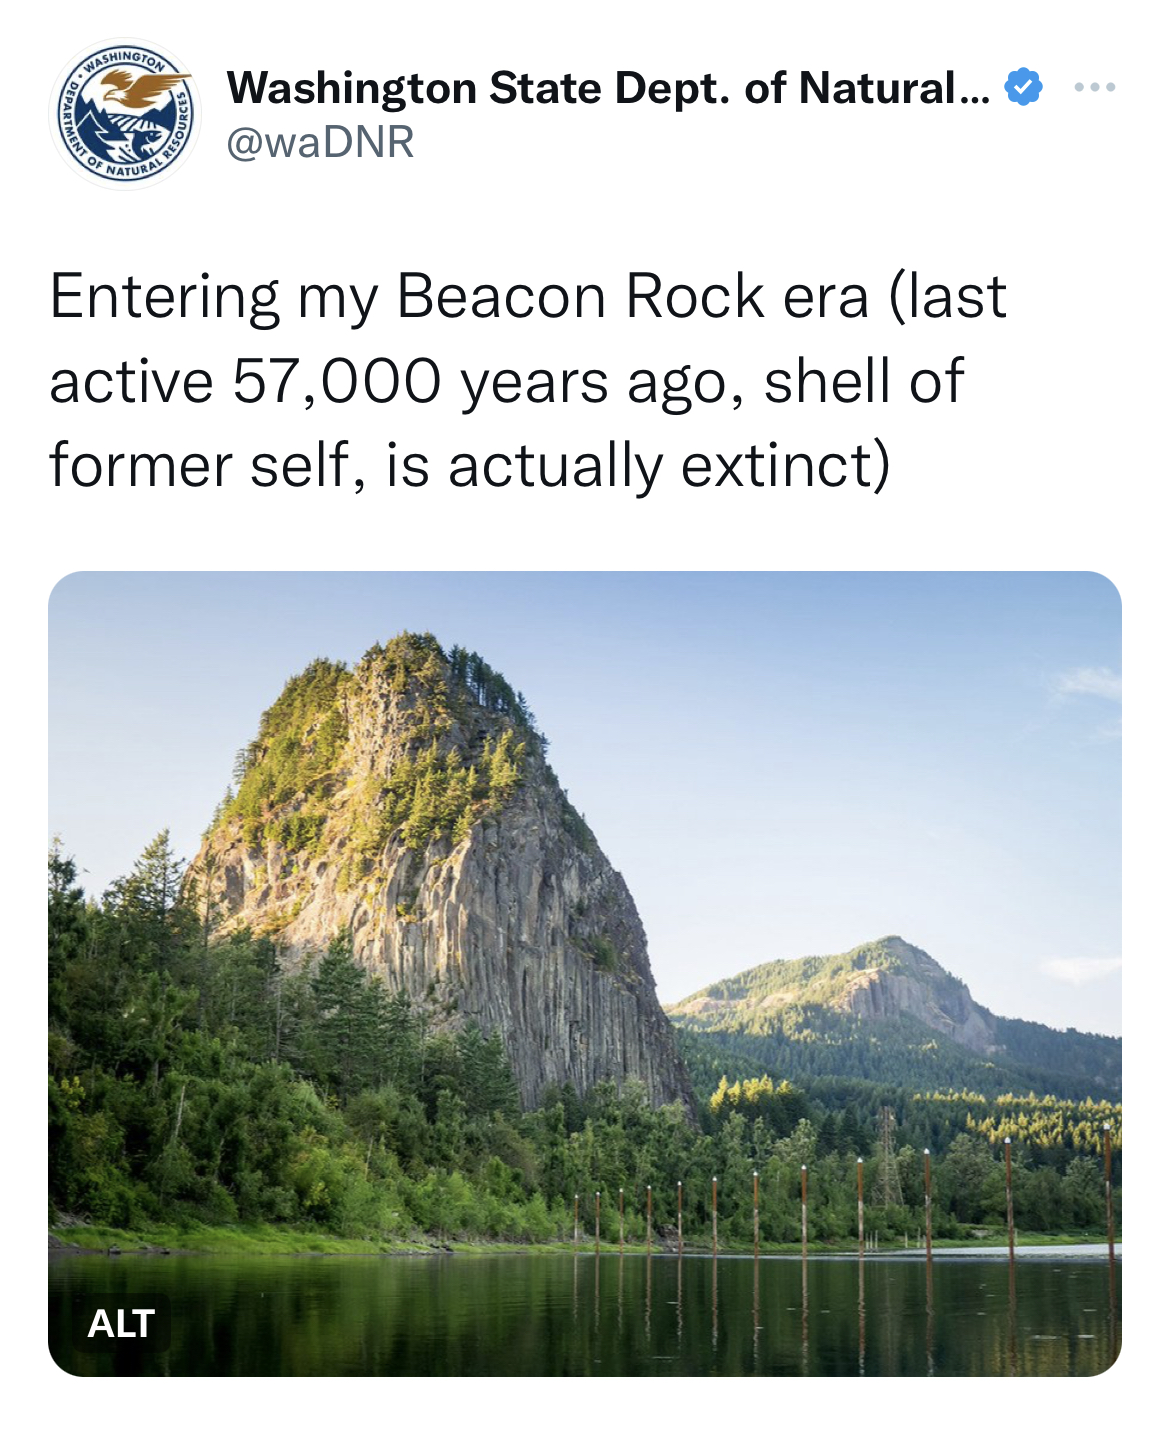 Washington Department of Natural Resources tweets - beacon rock state park - F Washington State Dept. of Natural... Entering my Beacon Rock era last active 57,000 years ago, shell of former self, is actually extinct Alt